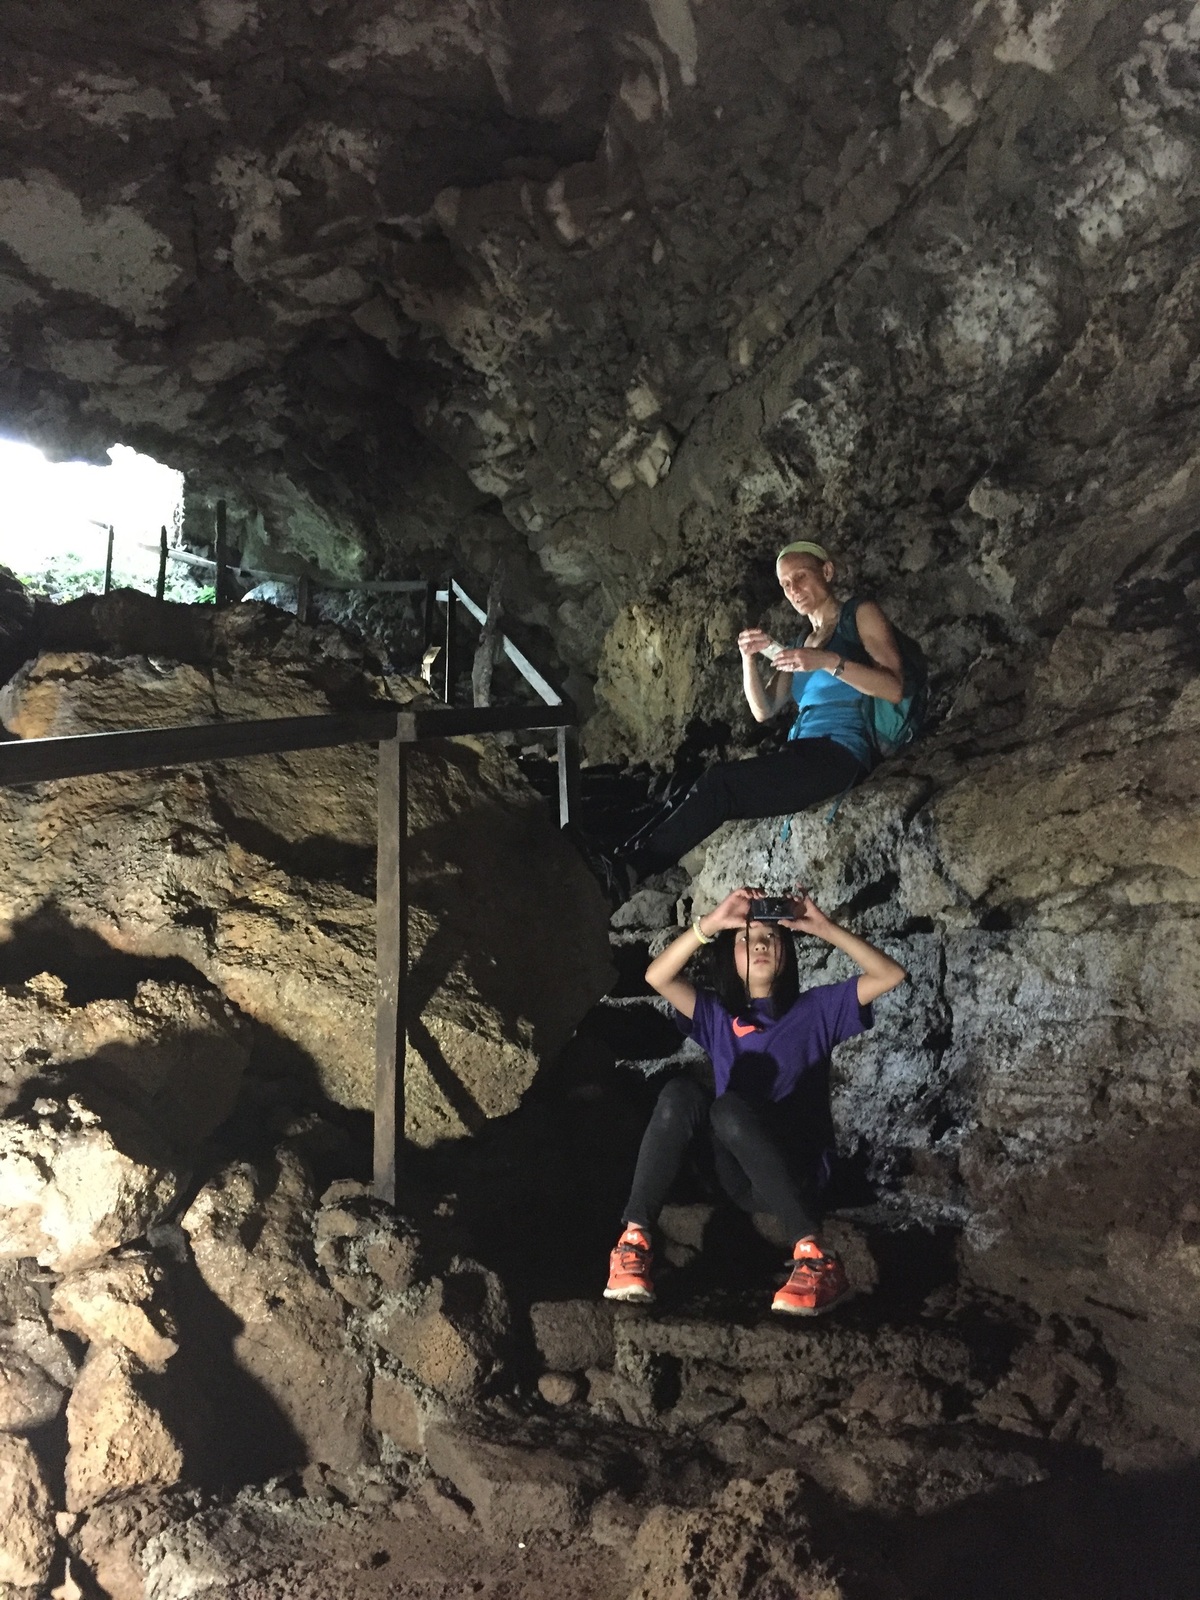 Lava tubes reveal the islands’ short volcanic history.